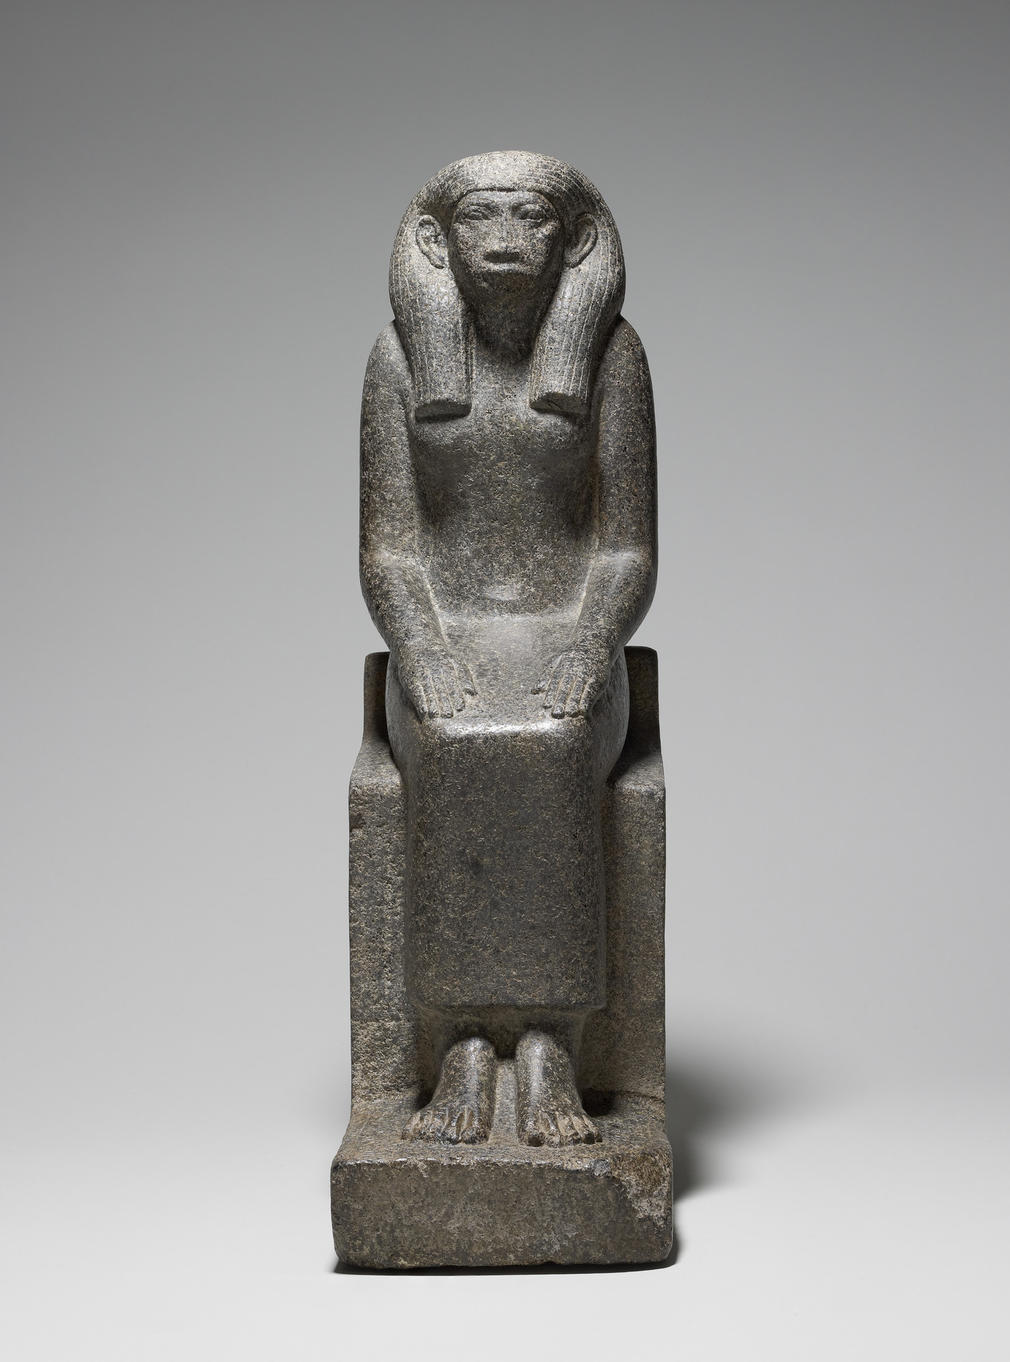 Black granite statue of Queen Senet, consort and mother of two as yet unidentified pharaohs of the XII Dynasty (c.1985–1785 BC). She is depicted seated on a throne with her hands resting on her thighs, palms down, fingers outstretched, and wearing a str